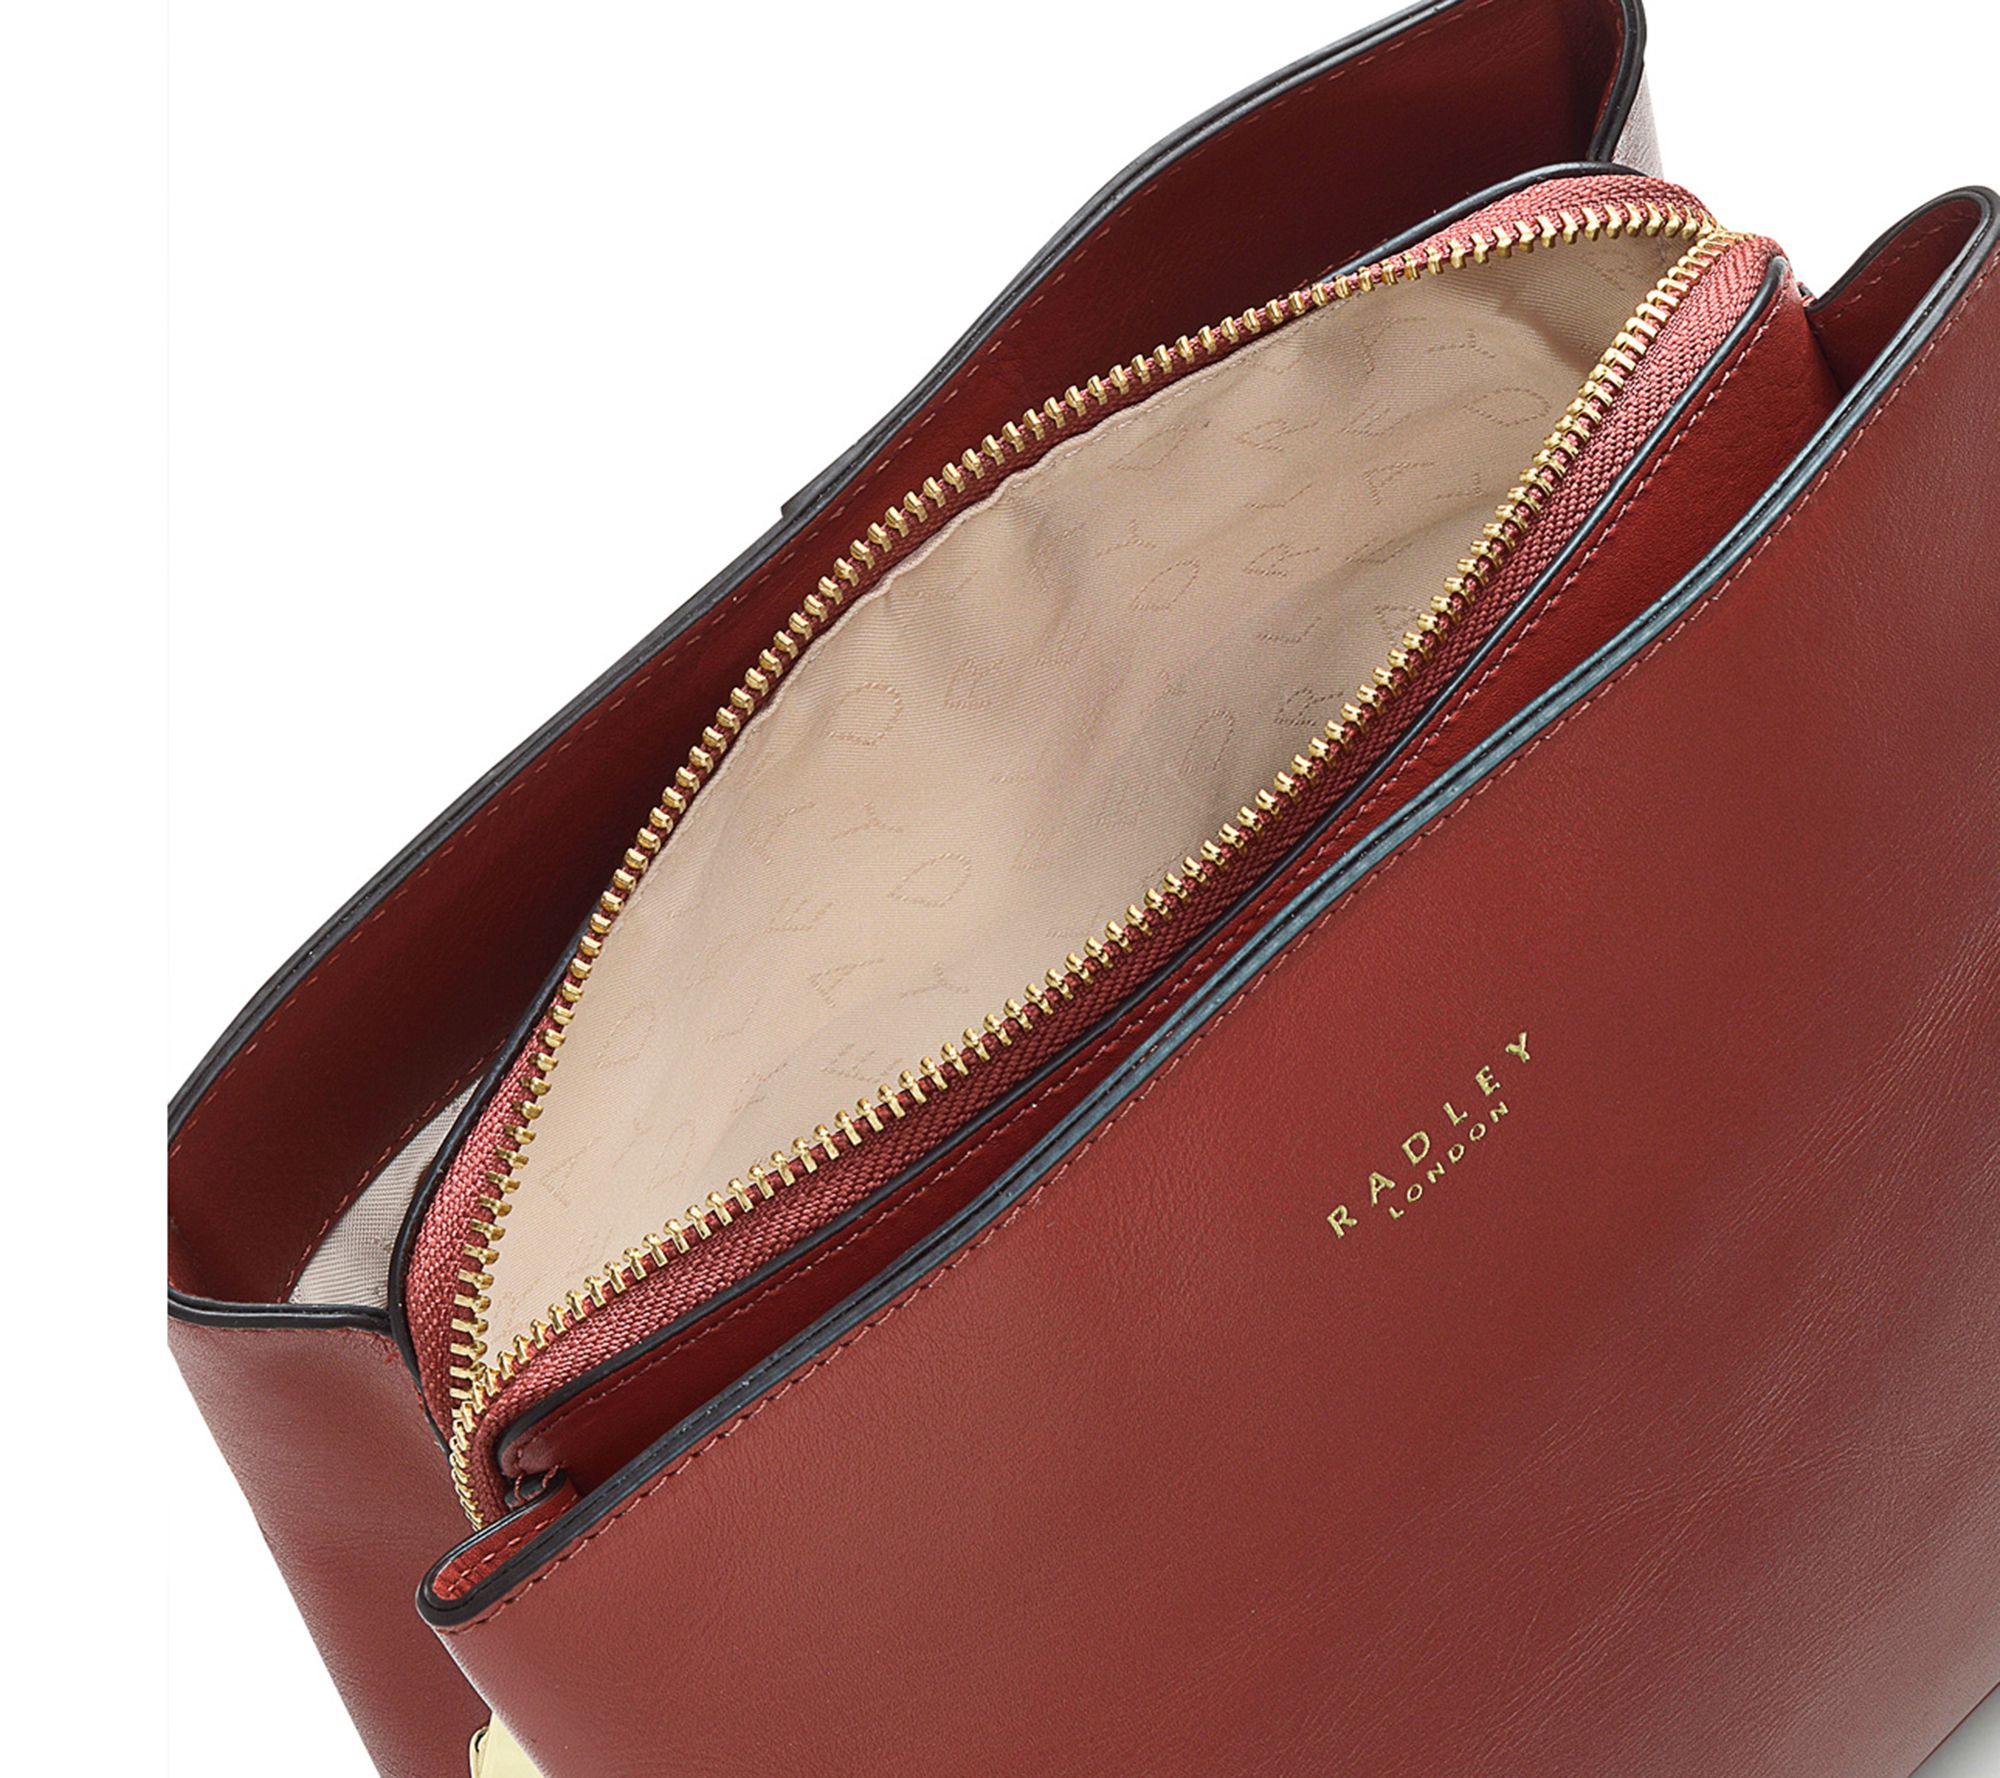 RADLEY London Dukes Place Medium Leather Compartment Multiway on QVC 